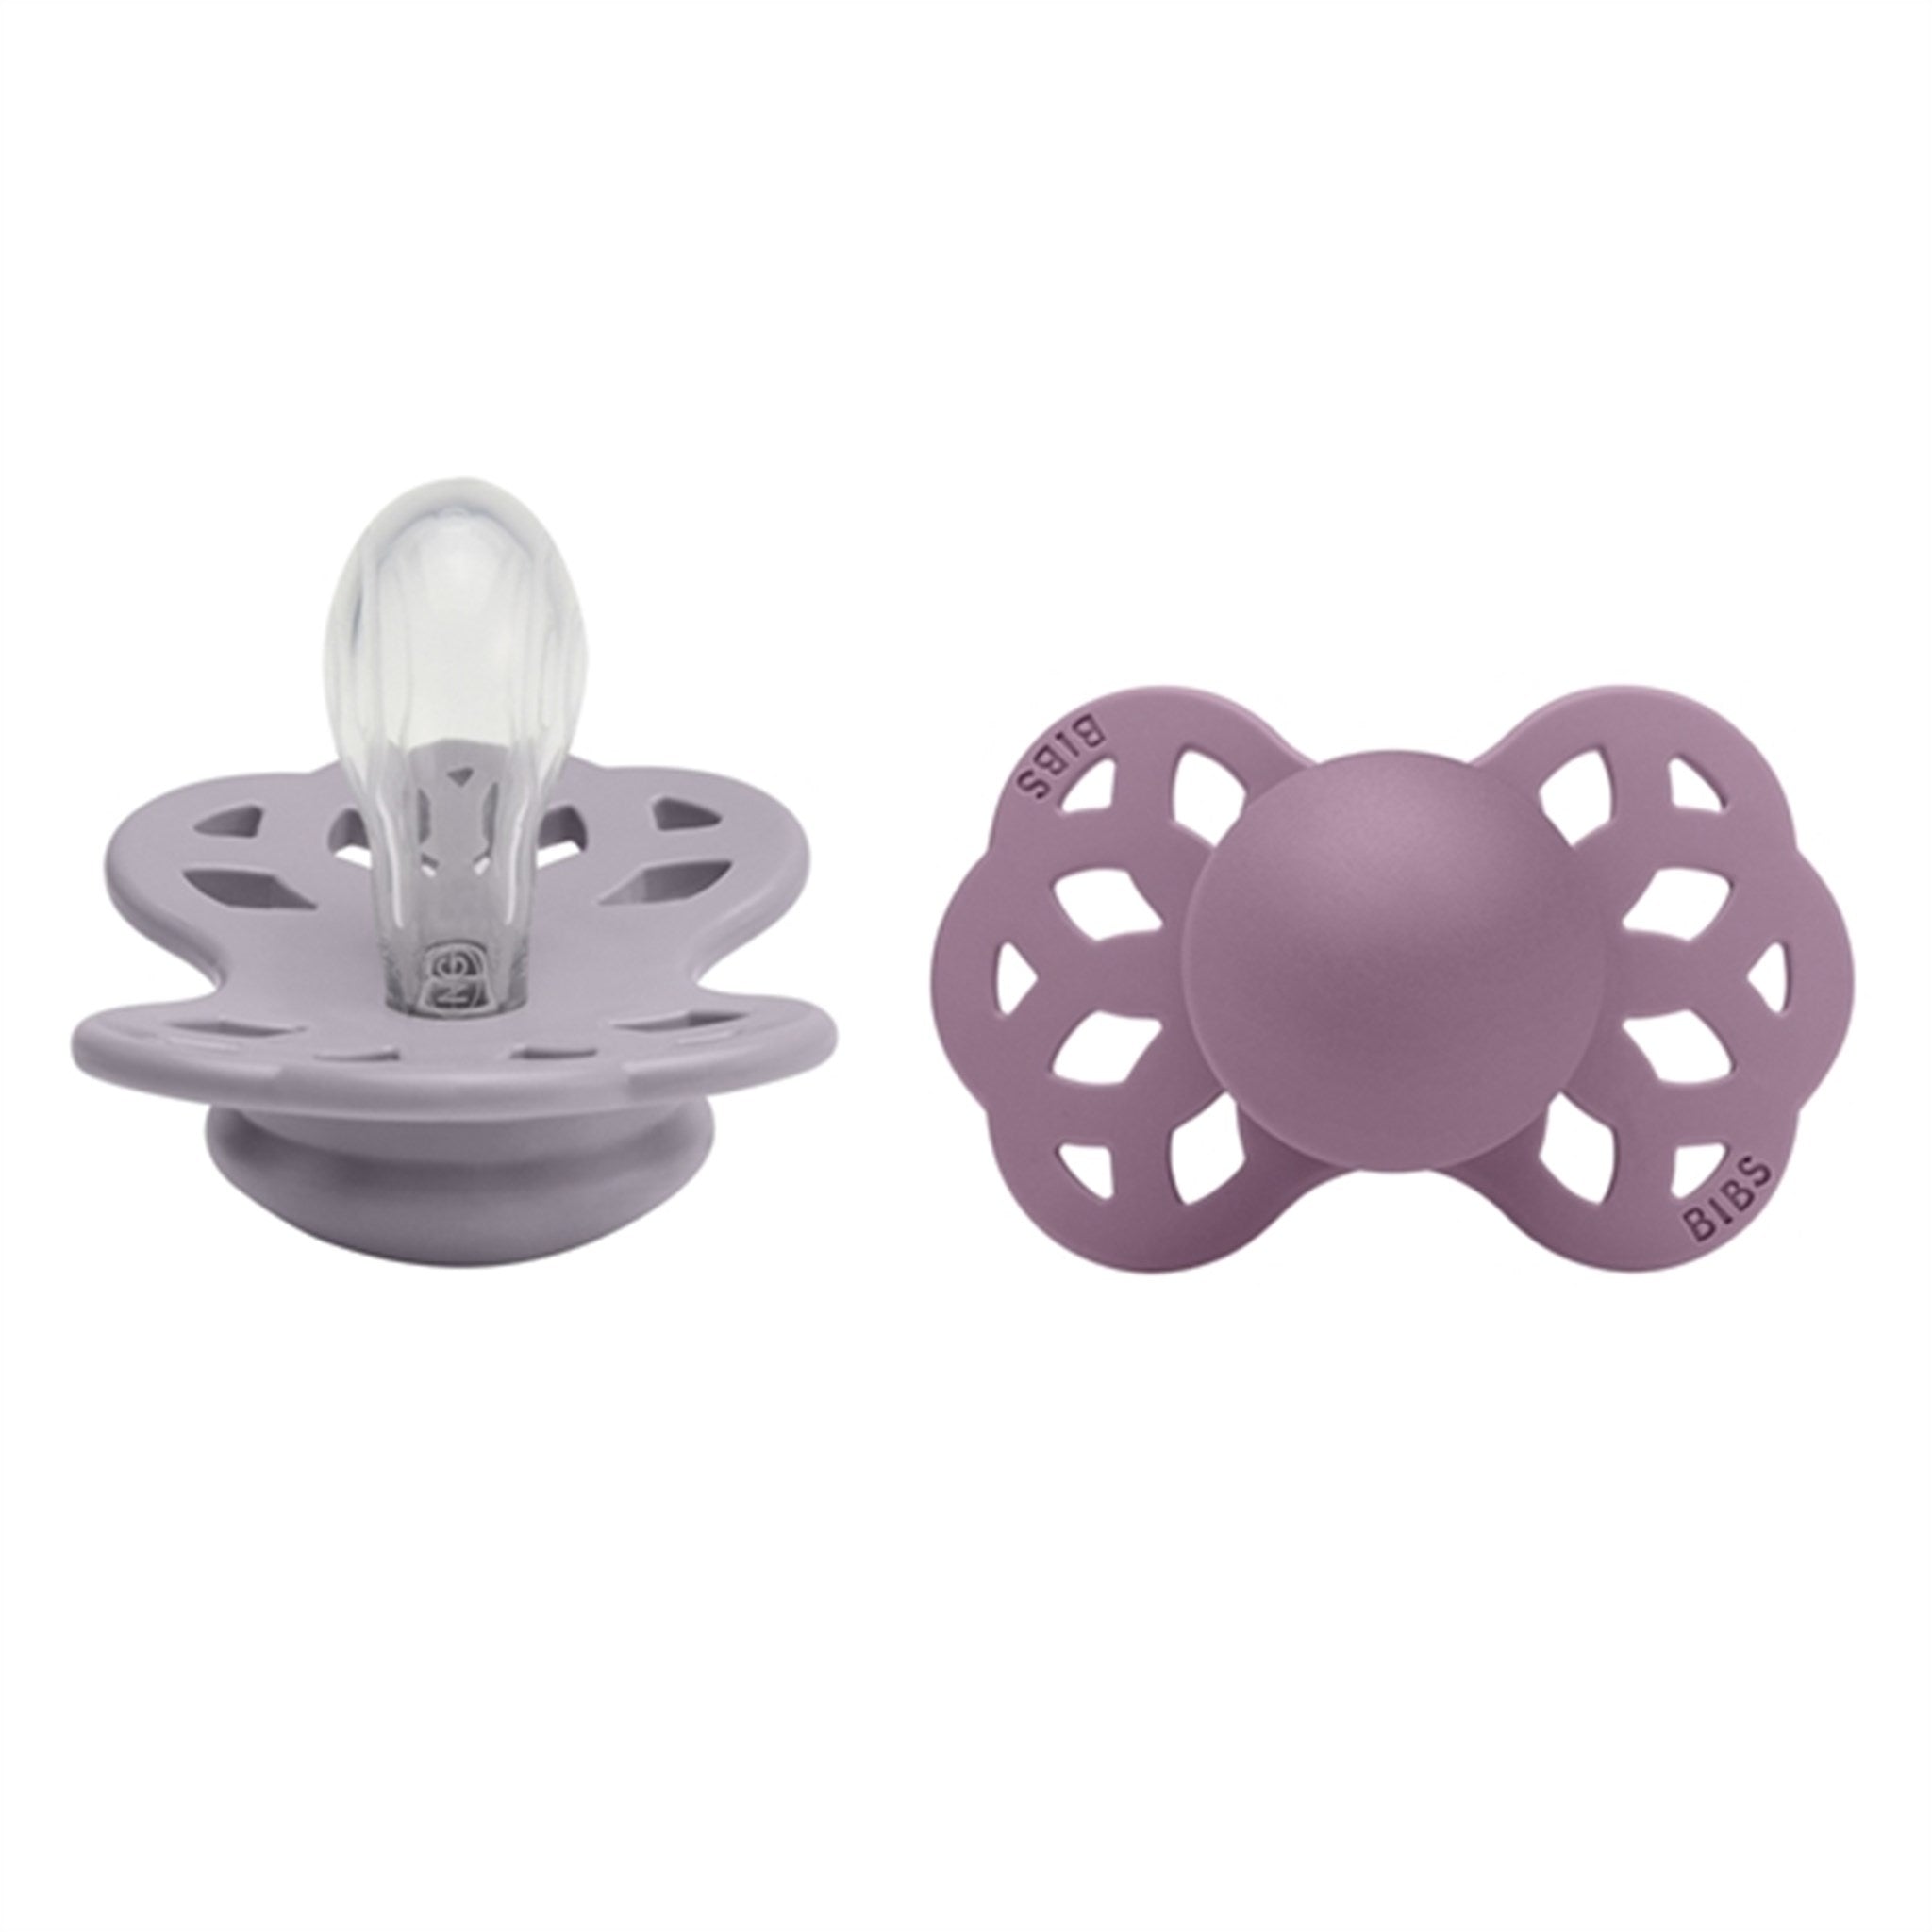 Bibs Infinity Silicone Symmetrical Pacifier 2-pack Fossil Grey/Mauve